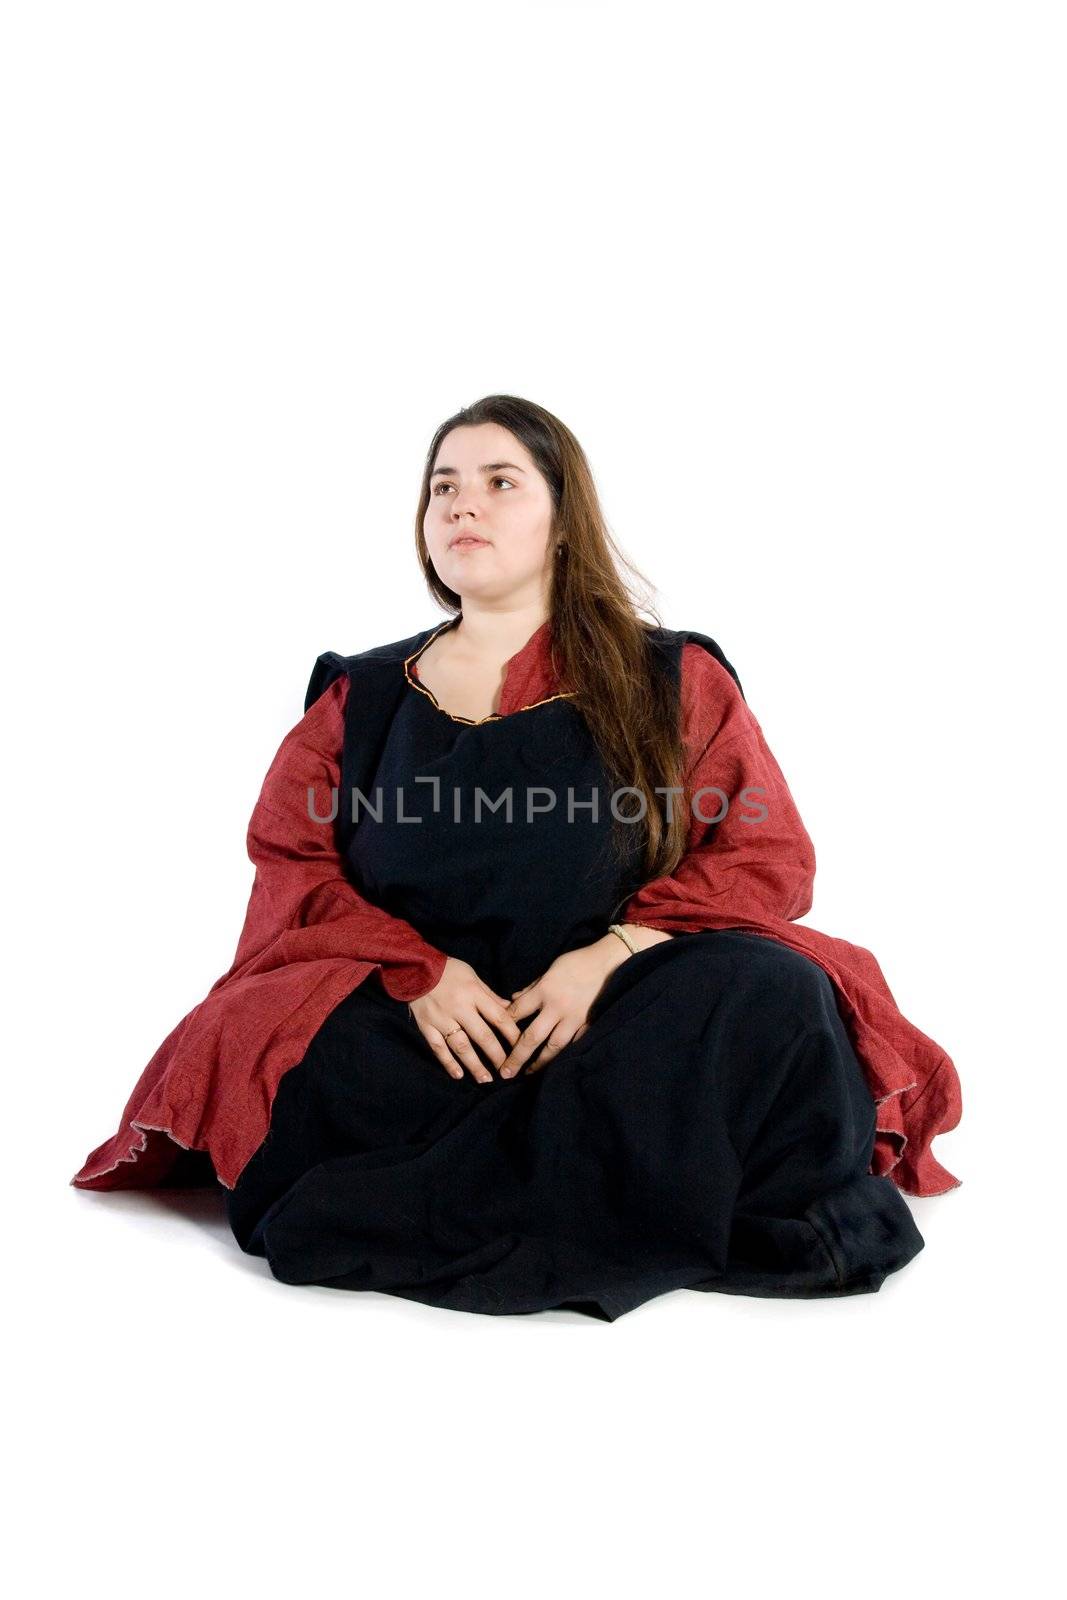 An isolated photo of a woman in a fancy medieval dress